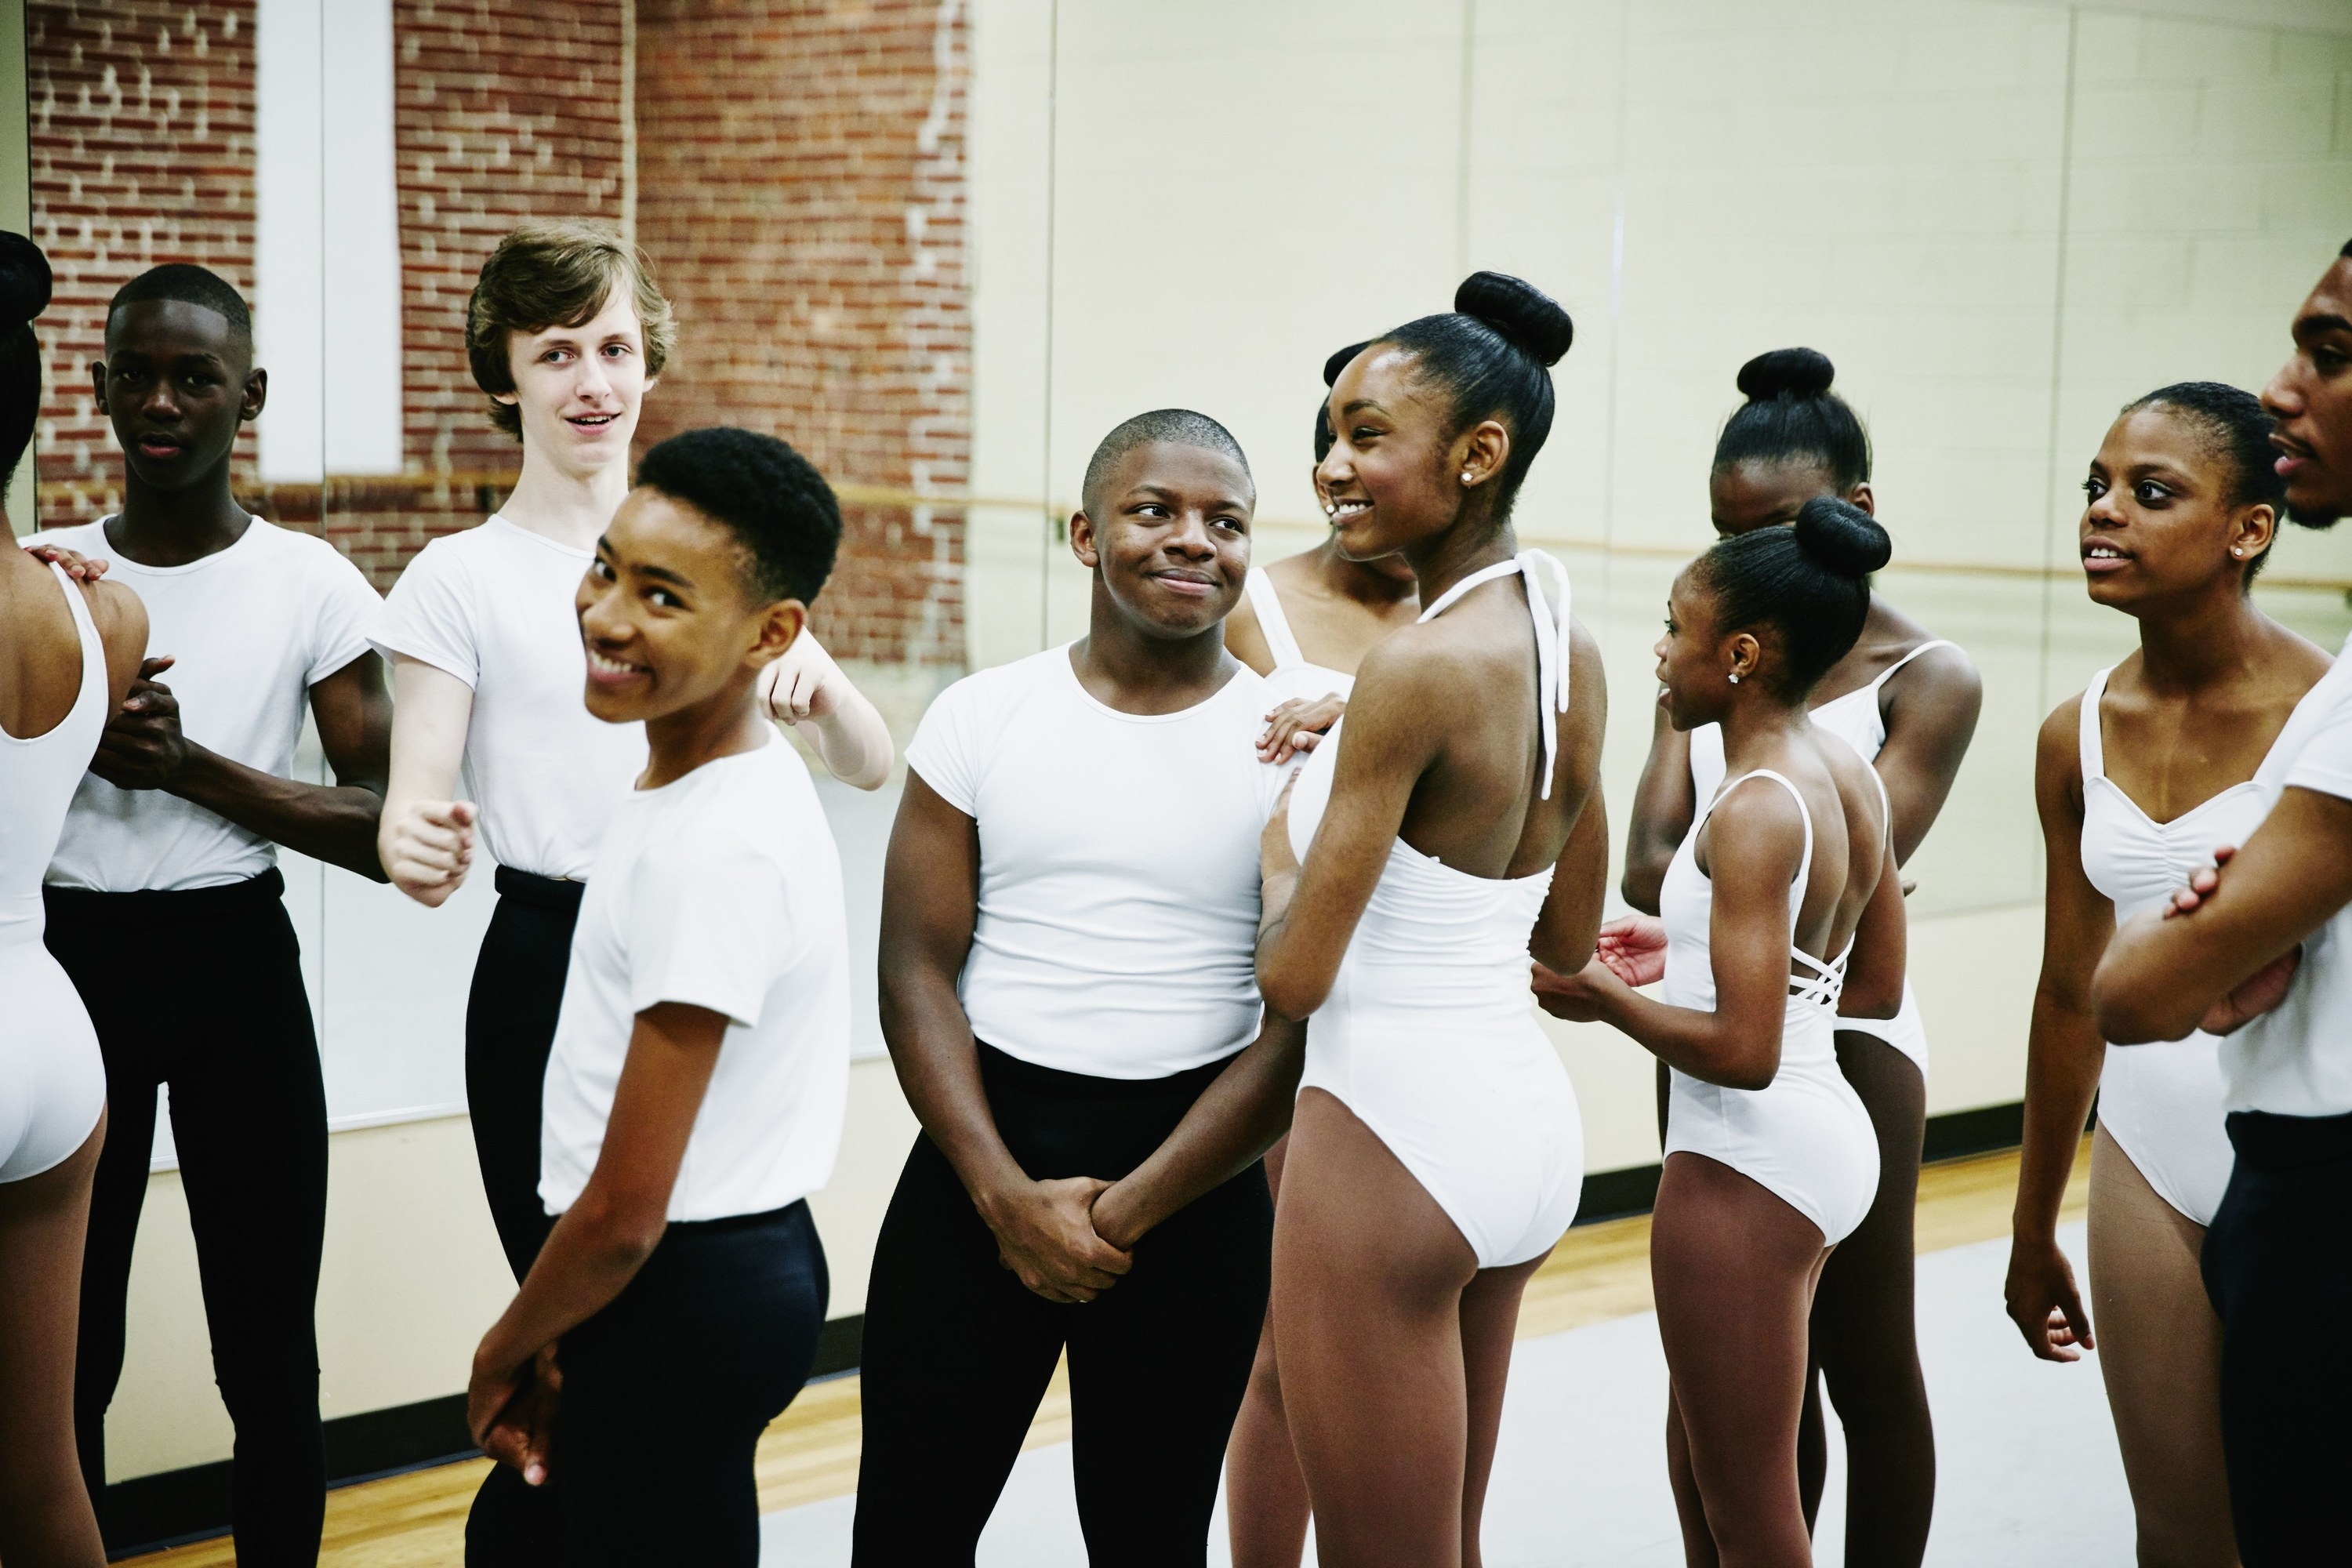 Male and female dancers standing together smiling, girls in white leotards and boys in white tops and black leggings.